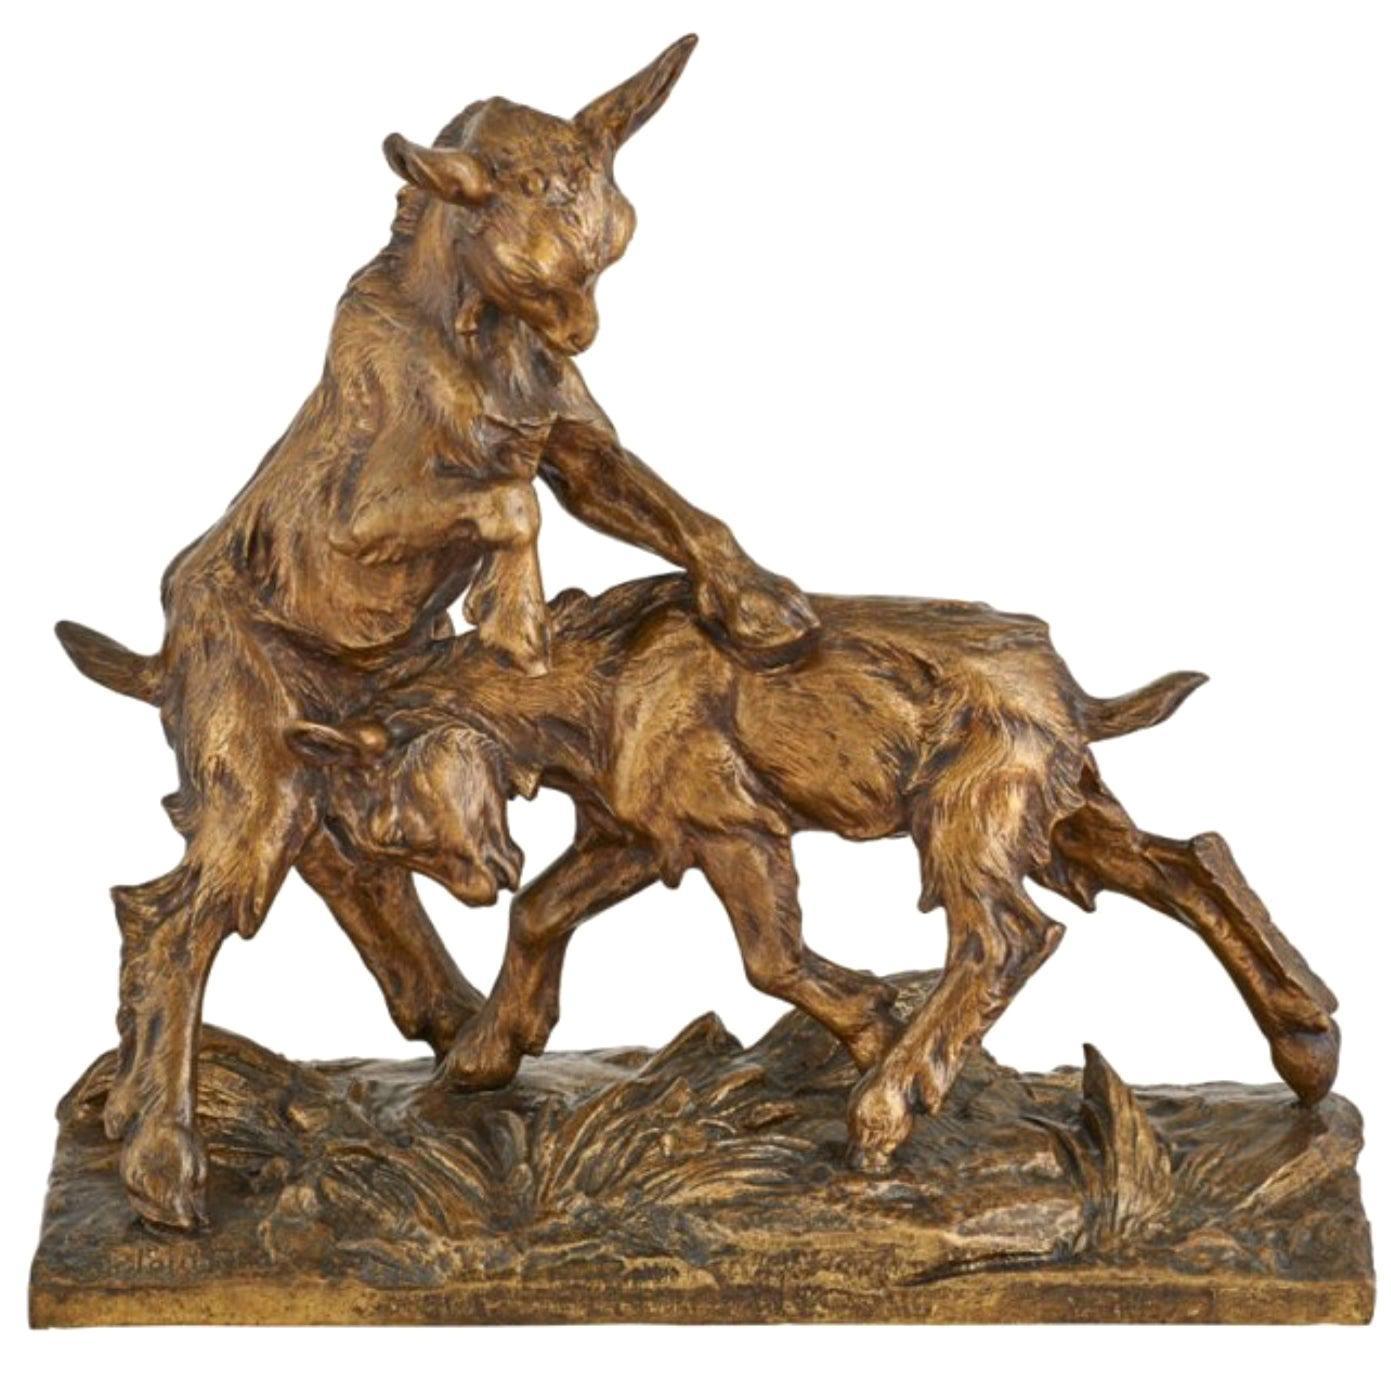 A large Charles Paillet French (1871-1937) bronze of two playful goats "Medaille D'or"

Here we have a fun and whimsical statue sculpture of two young goats playing in the grass. One is ramming his head while the other stands on his hind legs to get